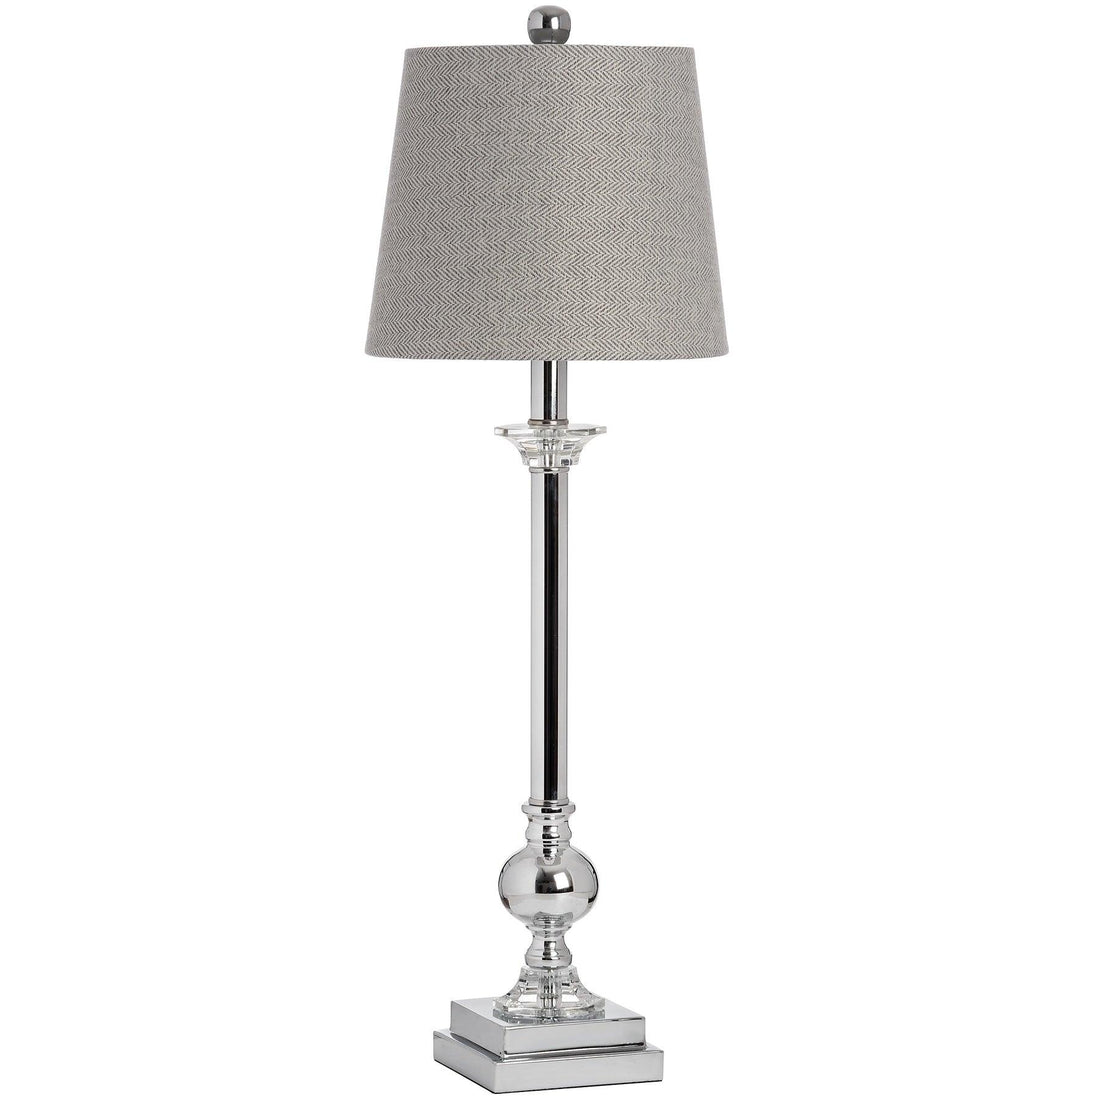 Milan Chrome Table Lamp - £129.95 - Lighting > Table Lamps > Hottest Deals 